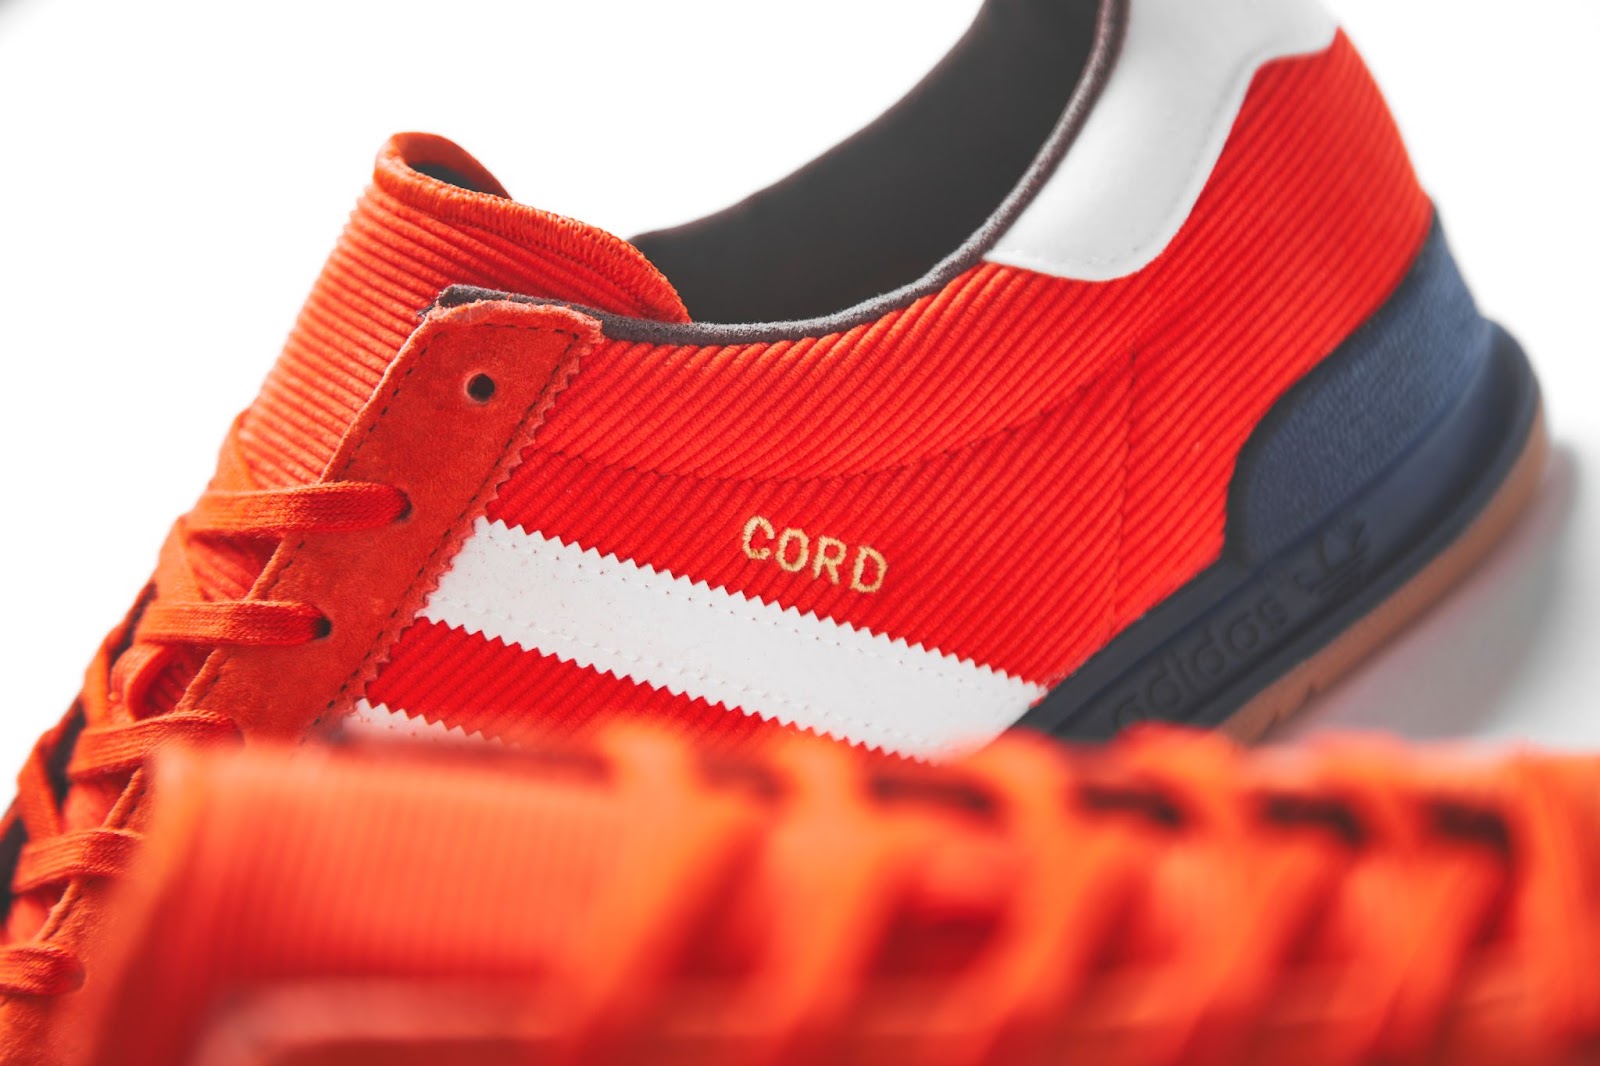 Everything you need to know about the adidas Originals Cord - Scotts Blog